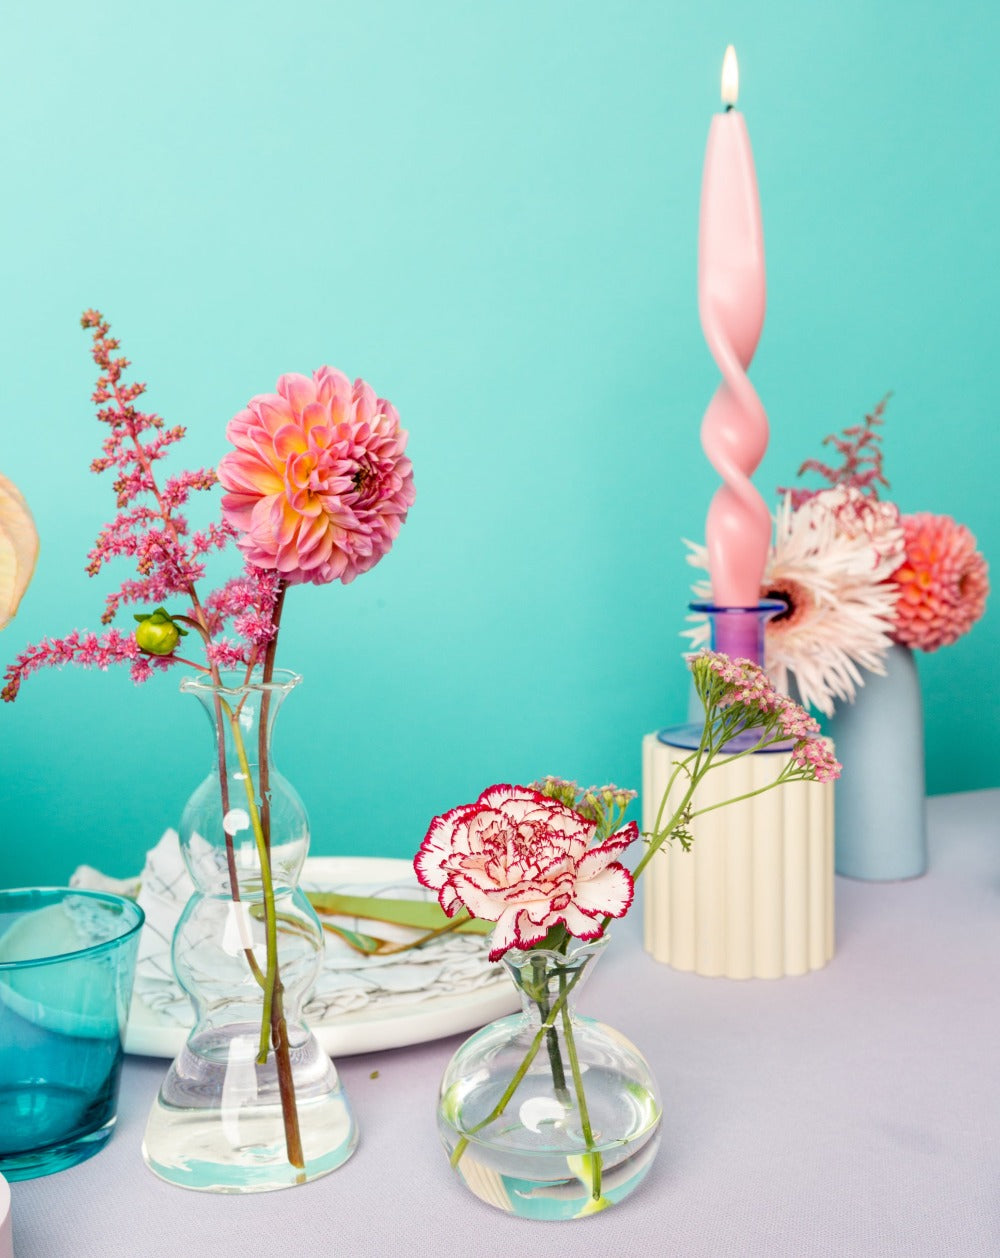 Trio of Bud Vases filled with pink floral stems in colourful modern table set up